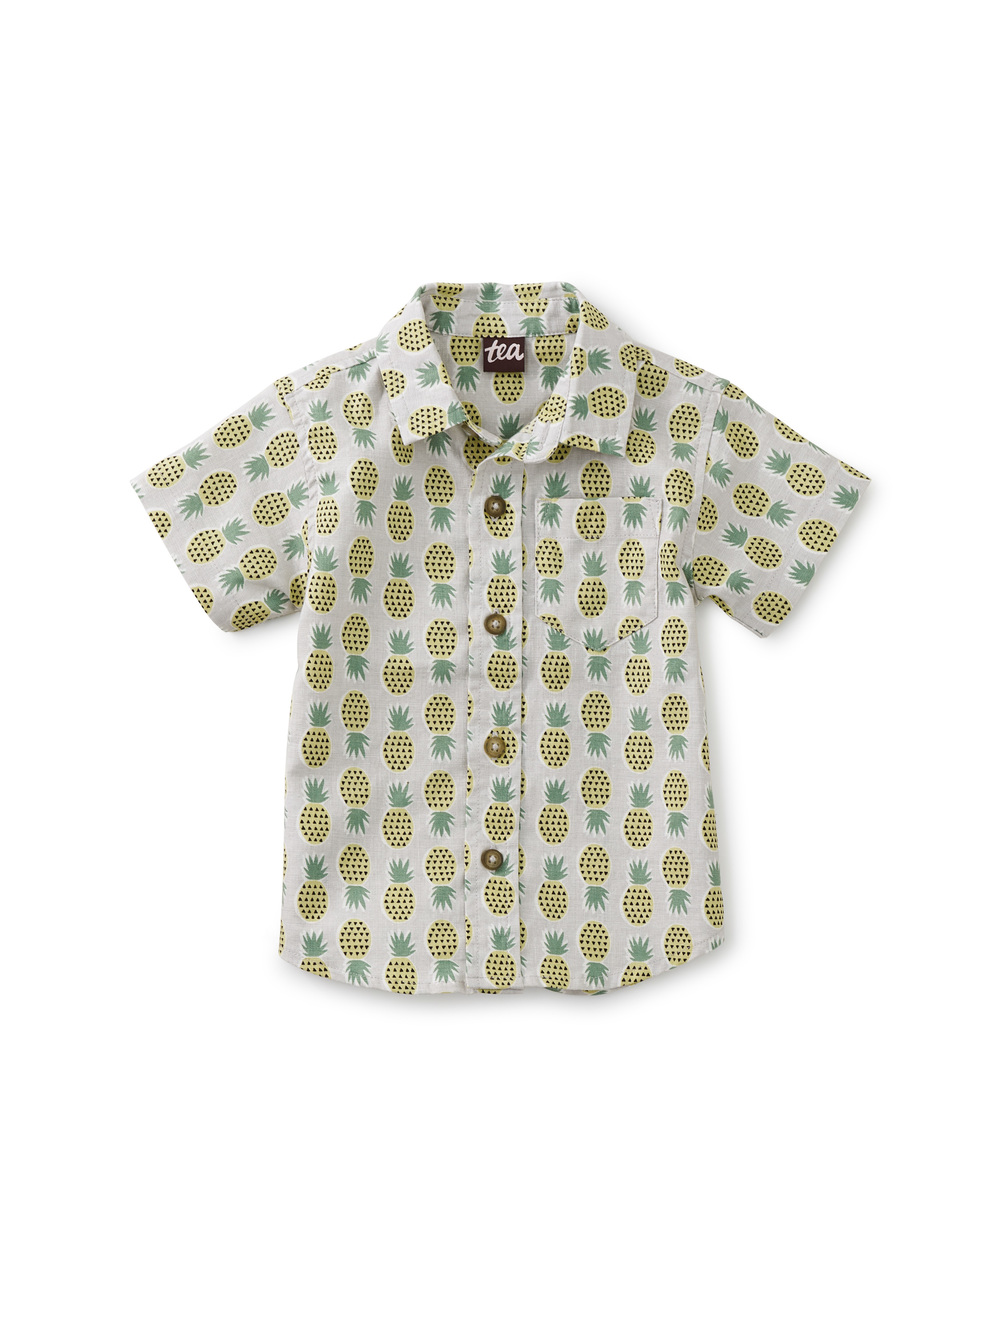 Printed Button Up Baby Shirt